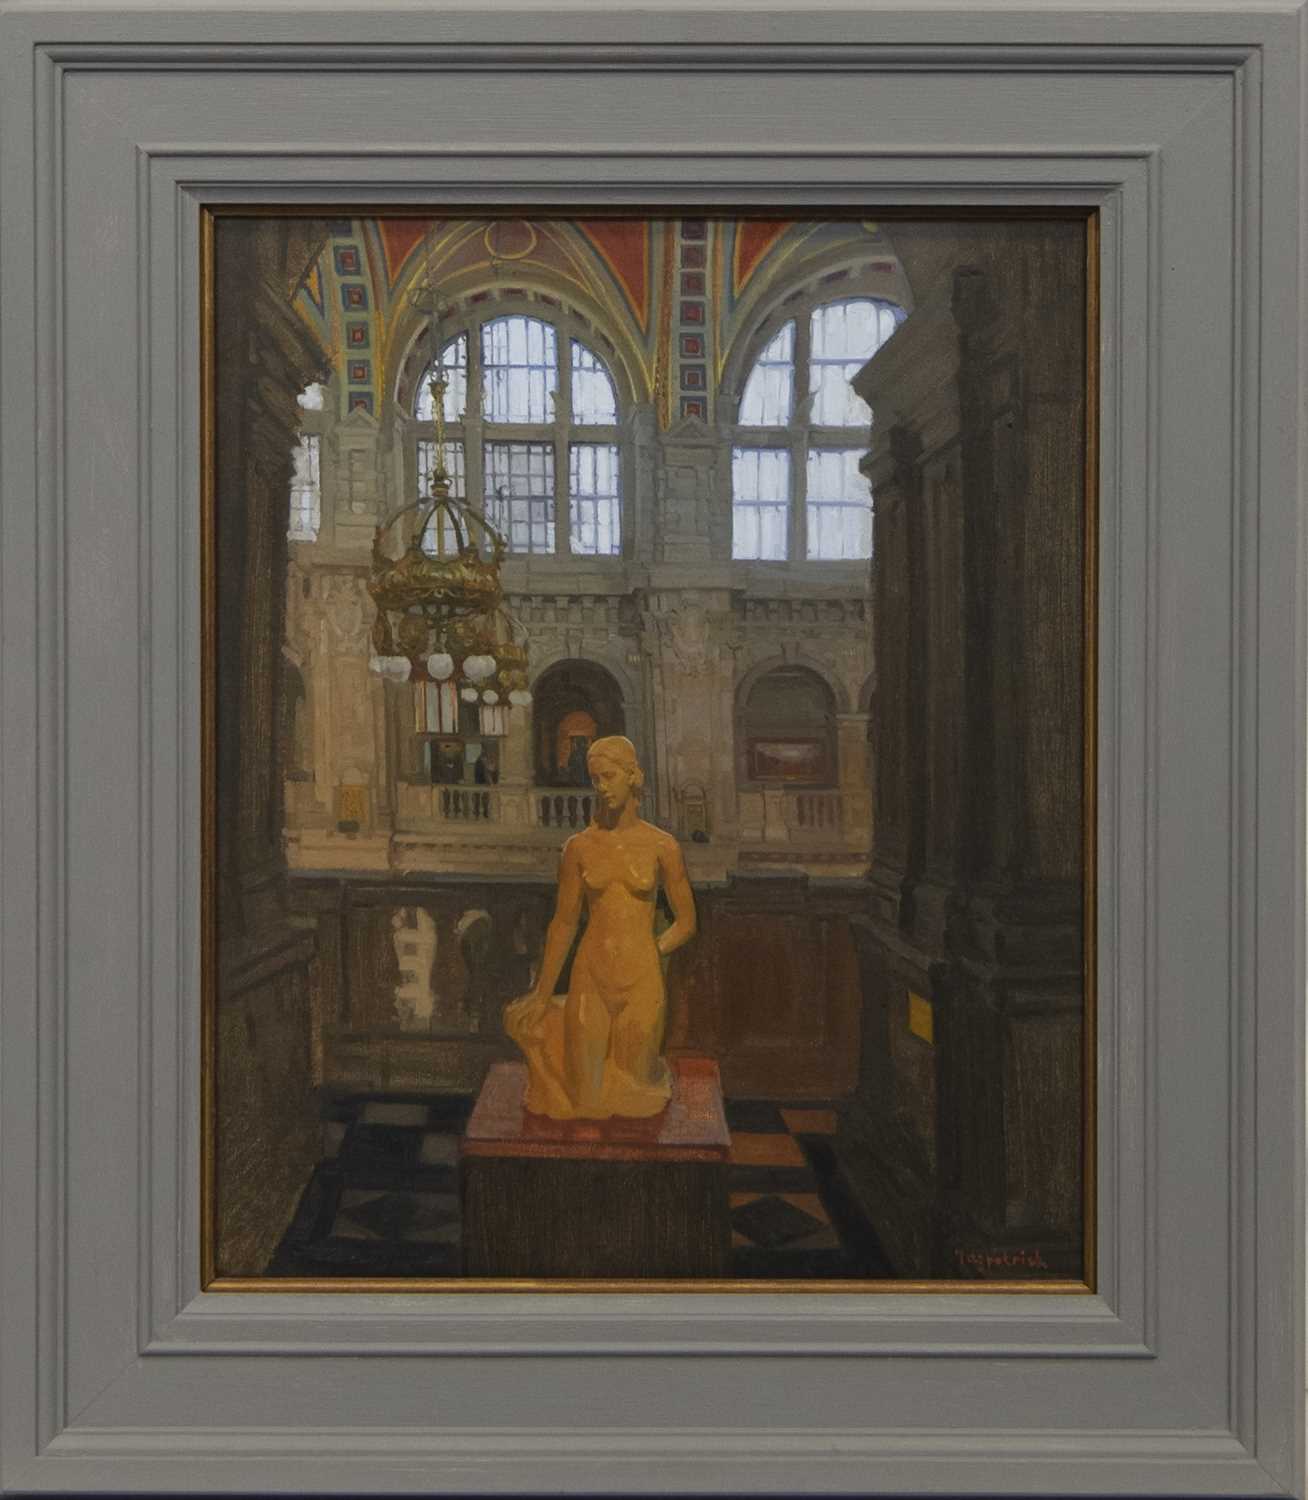 Lot 651 - THE NYMPH OF KELVINGROVE, AN OIL BY ANDREW FITZPATRICK